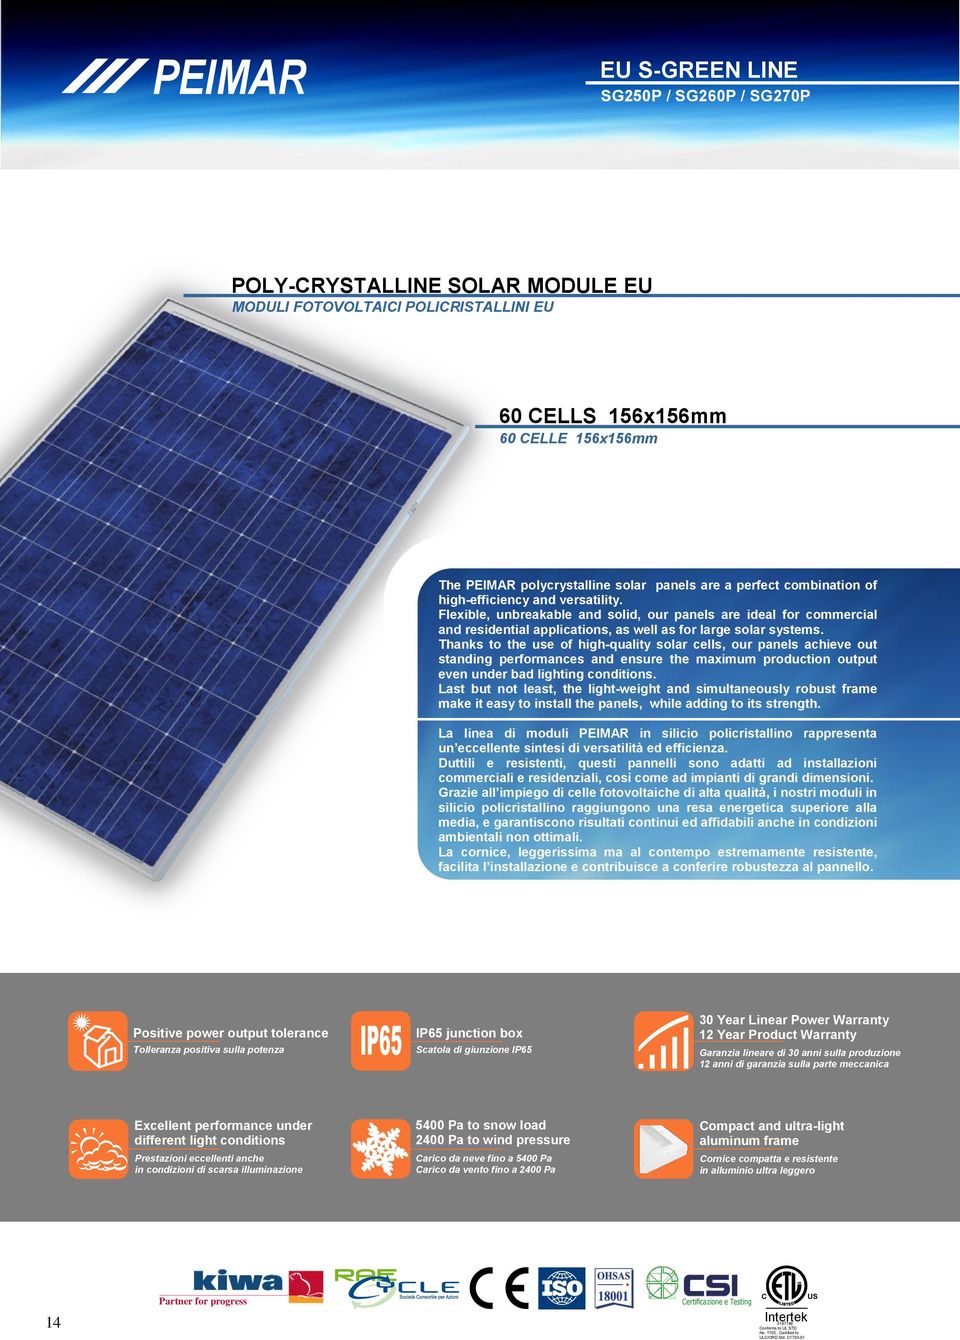 Thanks to the use of high-quality solar cells, our panels achieve out standing performances and ensure the maximum production output even under bad lighting conditions.